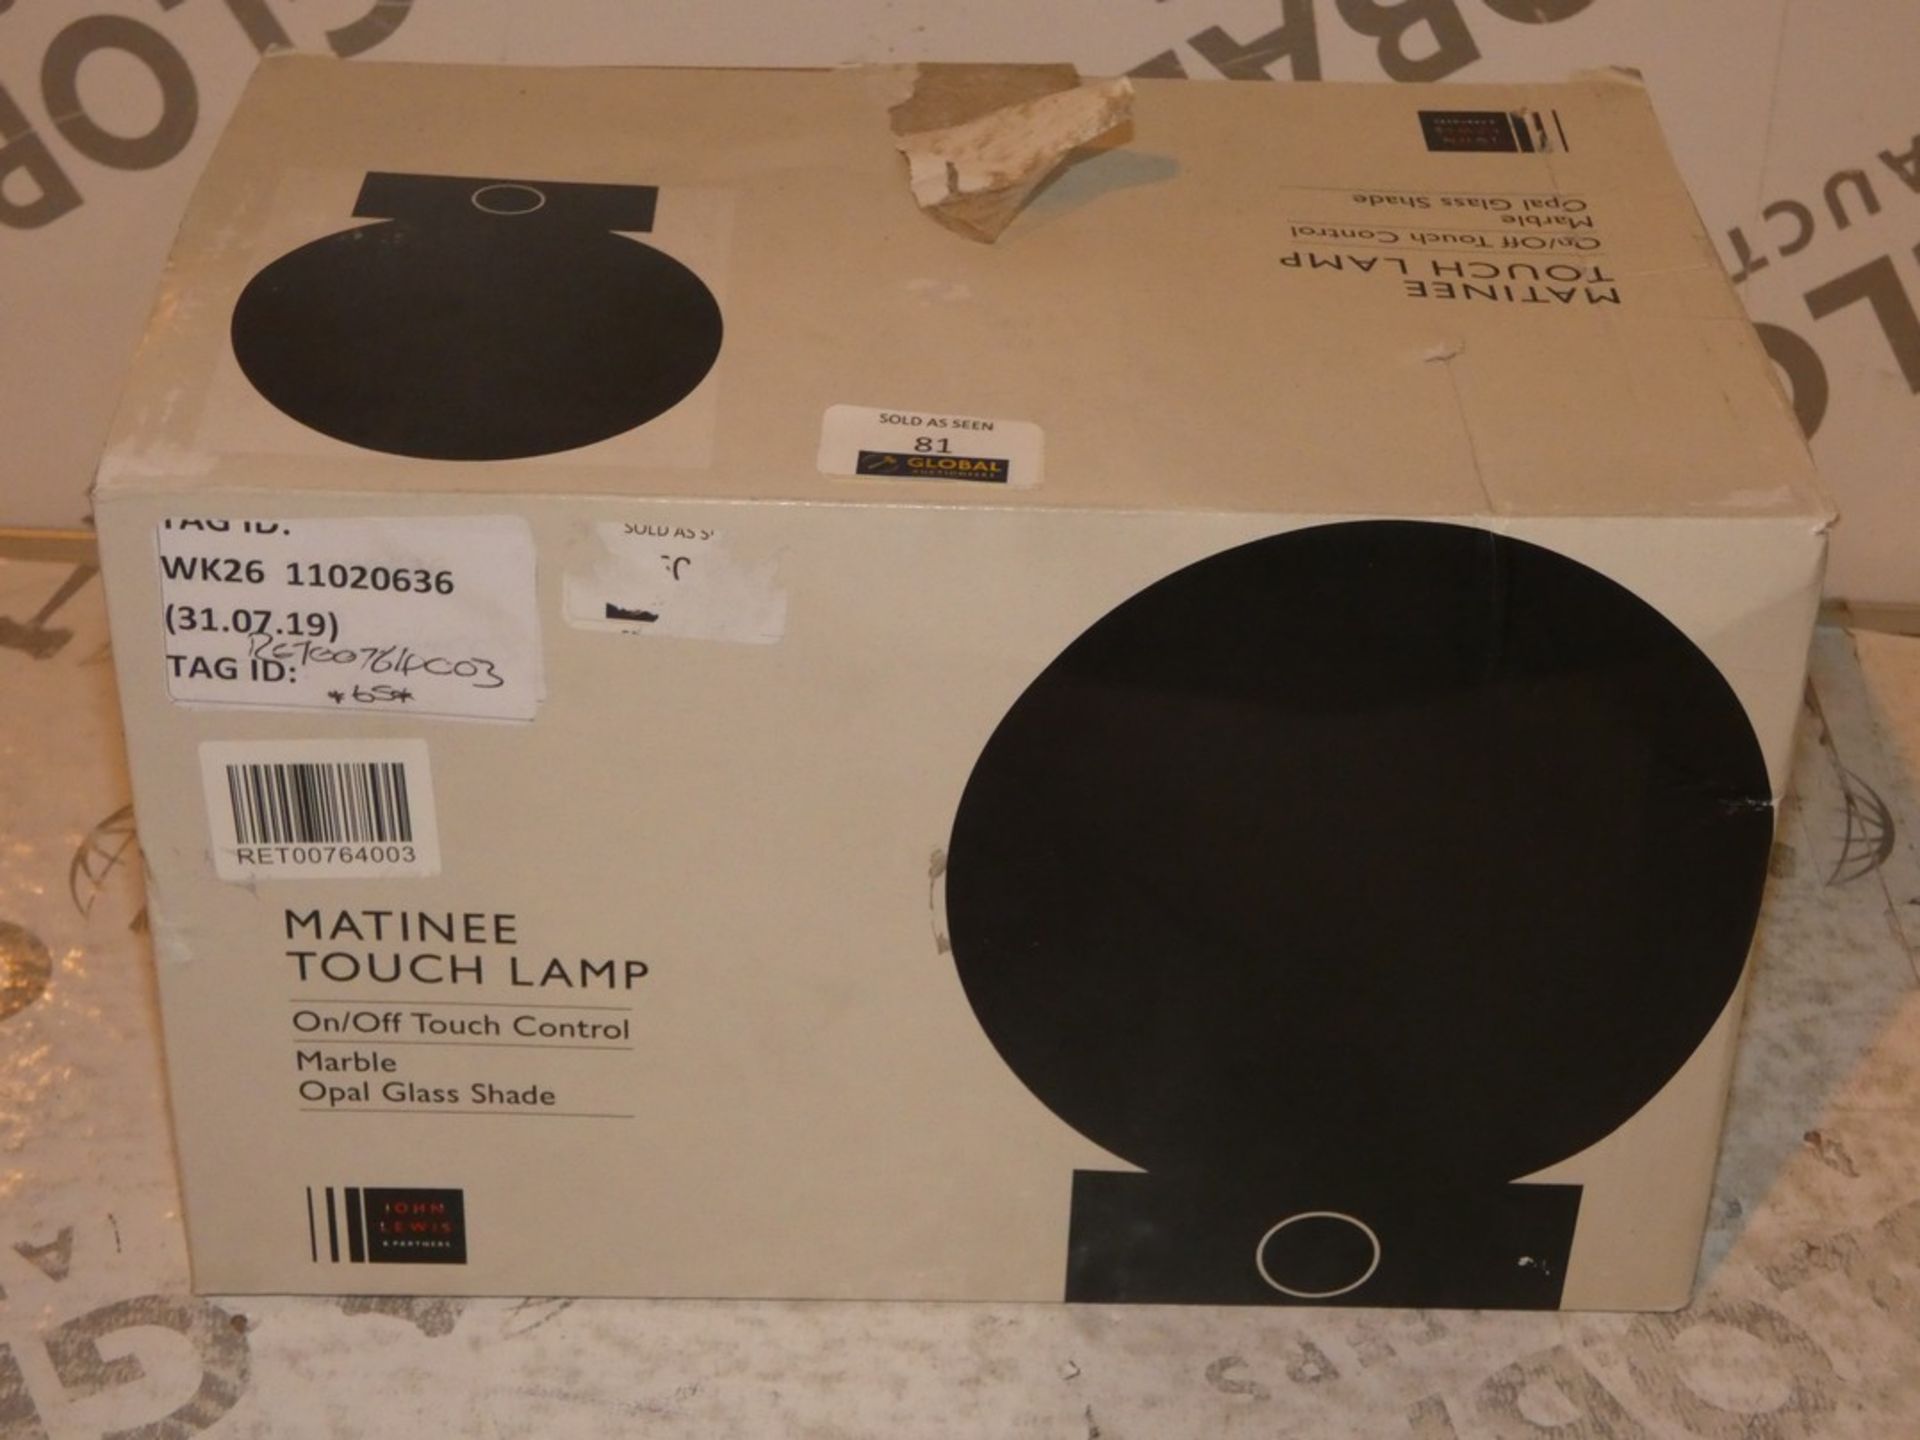 Boxed John Lewis and Partners Matinee Touch Lamp RRP £65 (RET00764003) (Viewing/Appraisals Highly